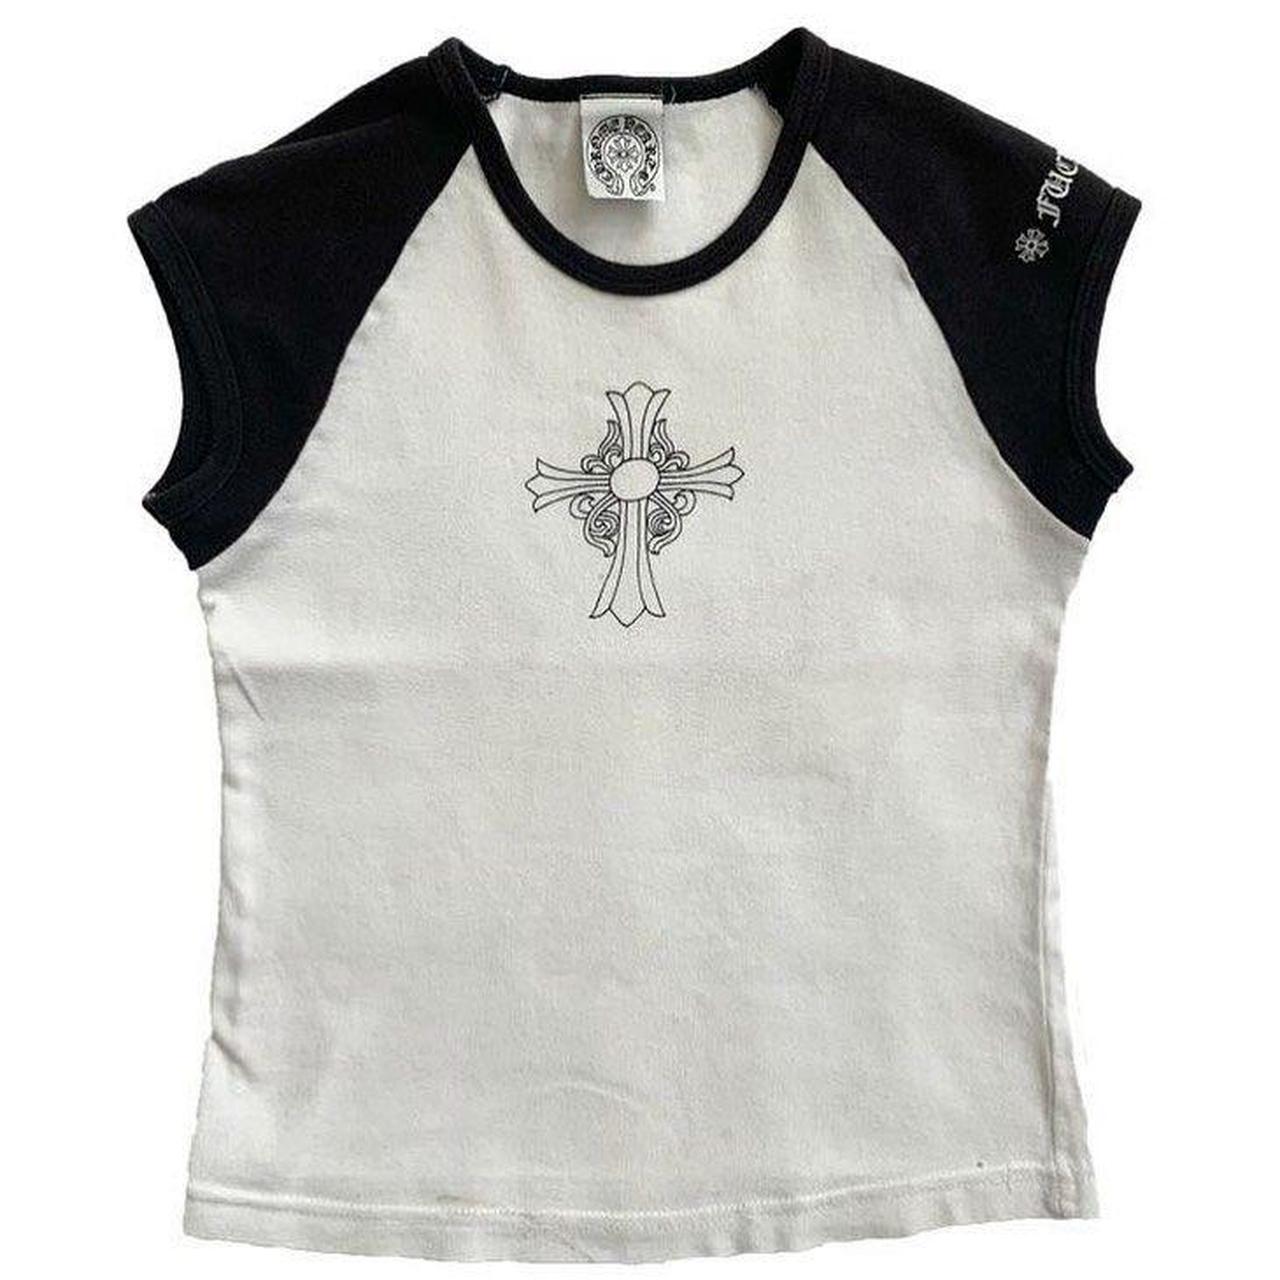 WTB SEARCHING FOR

chrome hearts baby tee / tight... - Depop